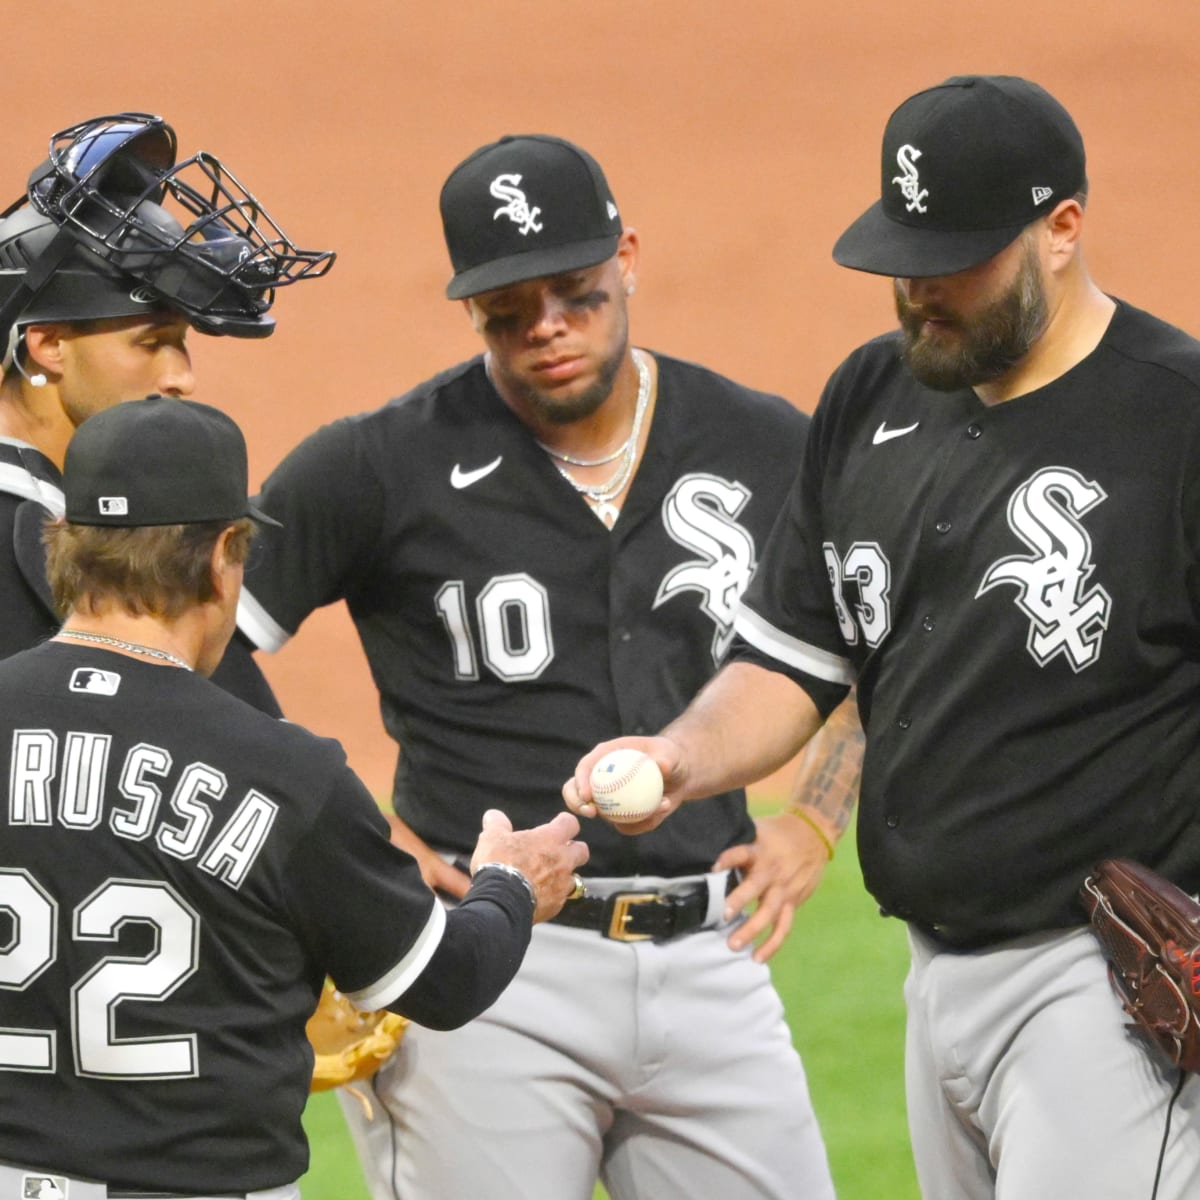 Tony La Russa expectations with White Sox in 2021